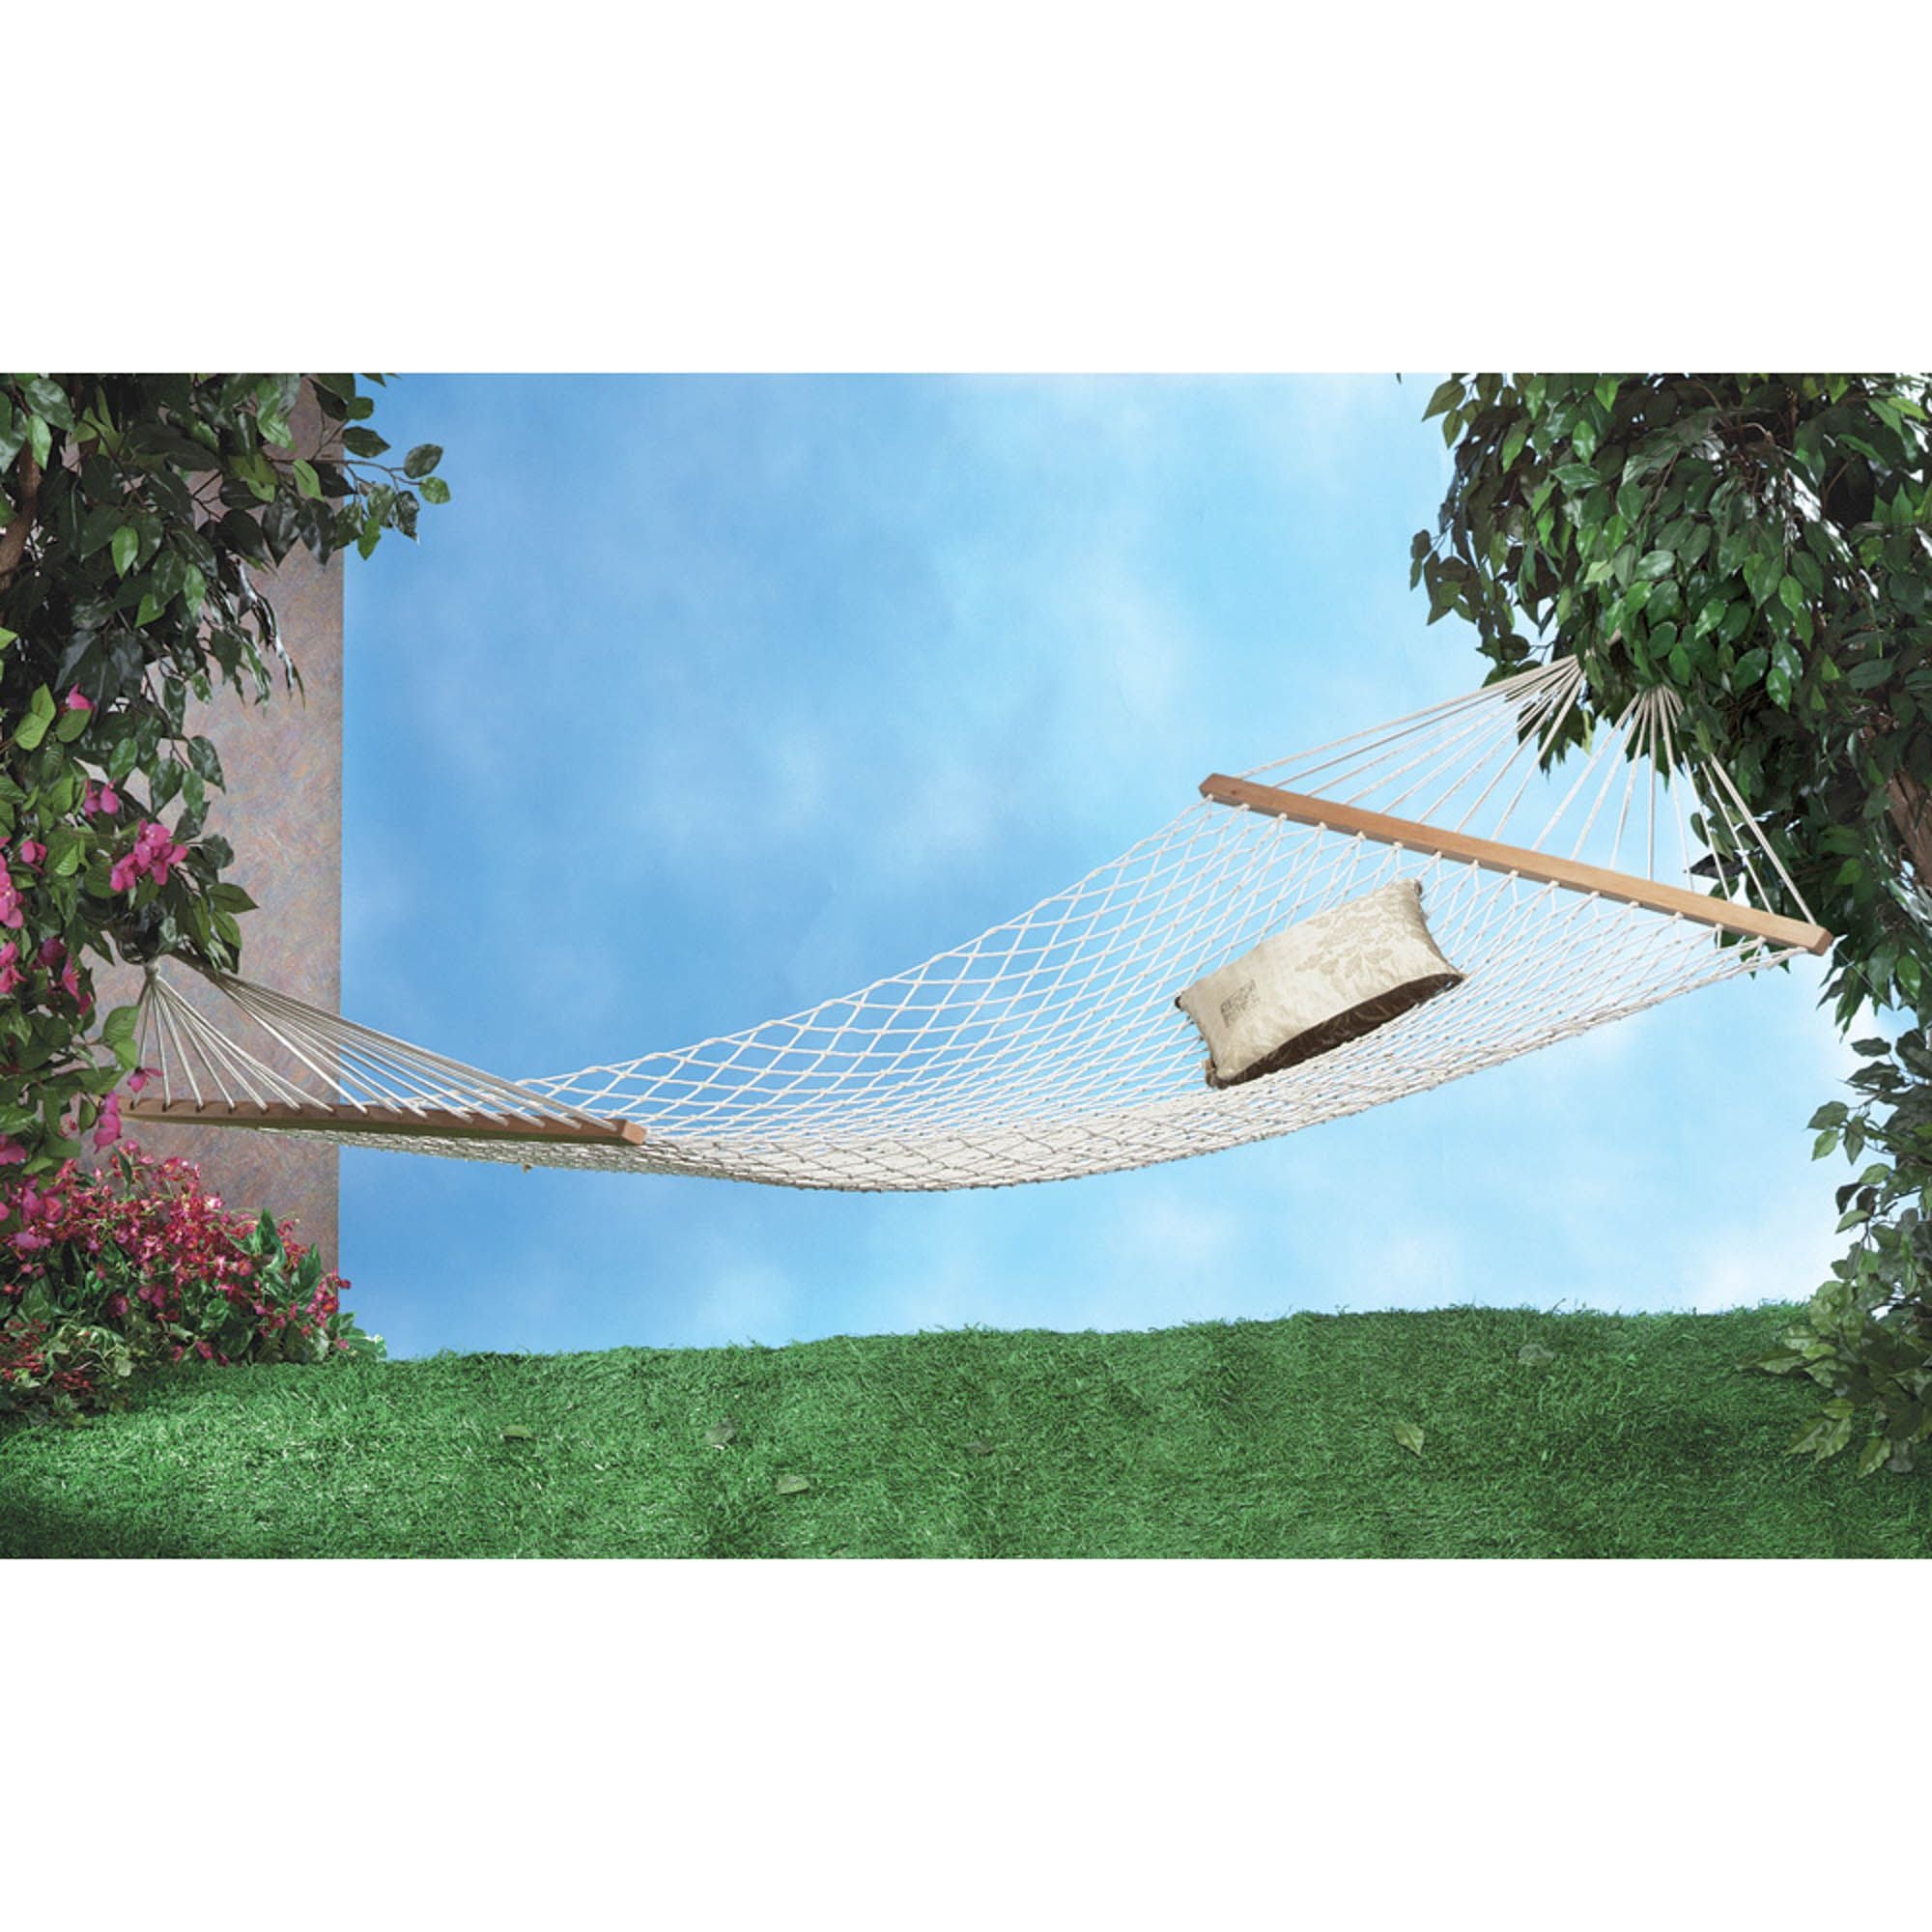 53.5" White and Brown Two Person Outdoor Hammock